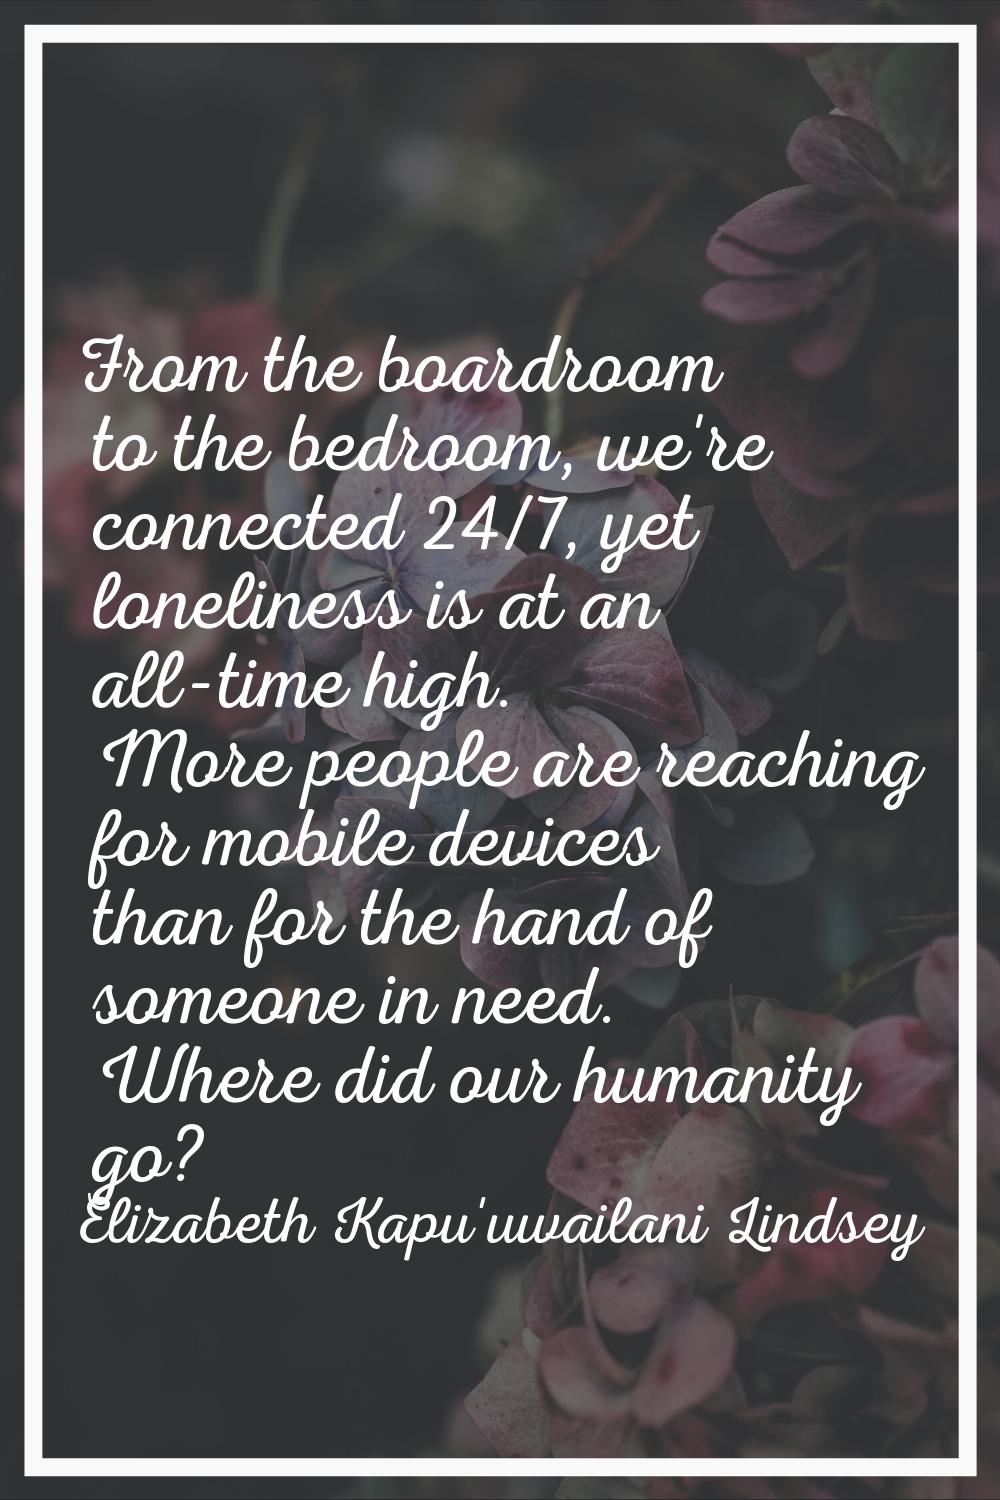 From the boardroom to the bedroom, we're connected 24/7, yet loneliness is at an all-time high. Mor